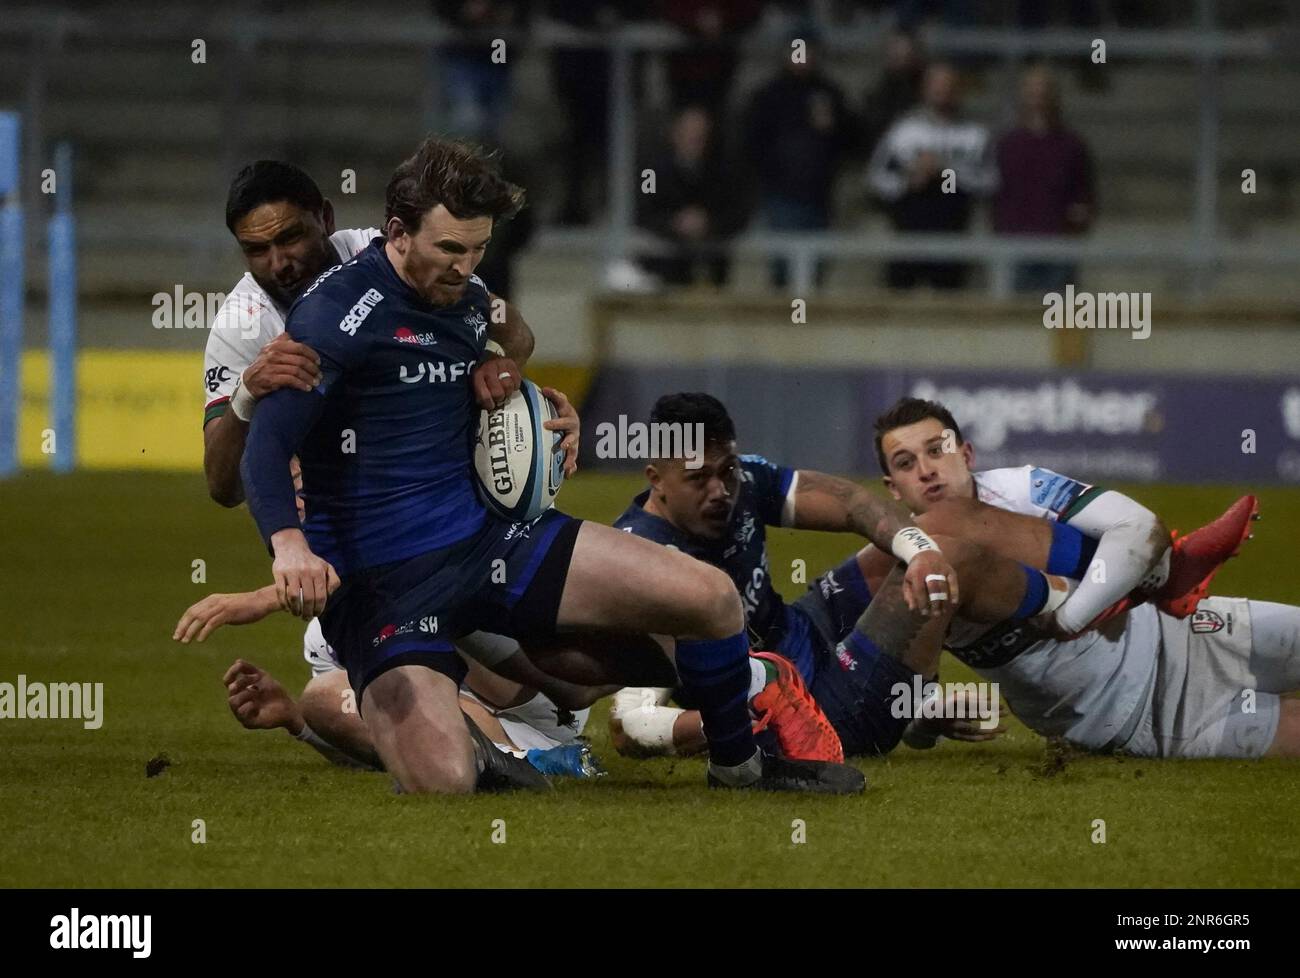 Sale Sharks full-back Simon Hammersley is tackled by London Irish centre Curtis Rona during a Gallagher Premiership Rugby Union match, won by Sharks 39-0, Friday, Mar